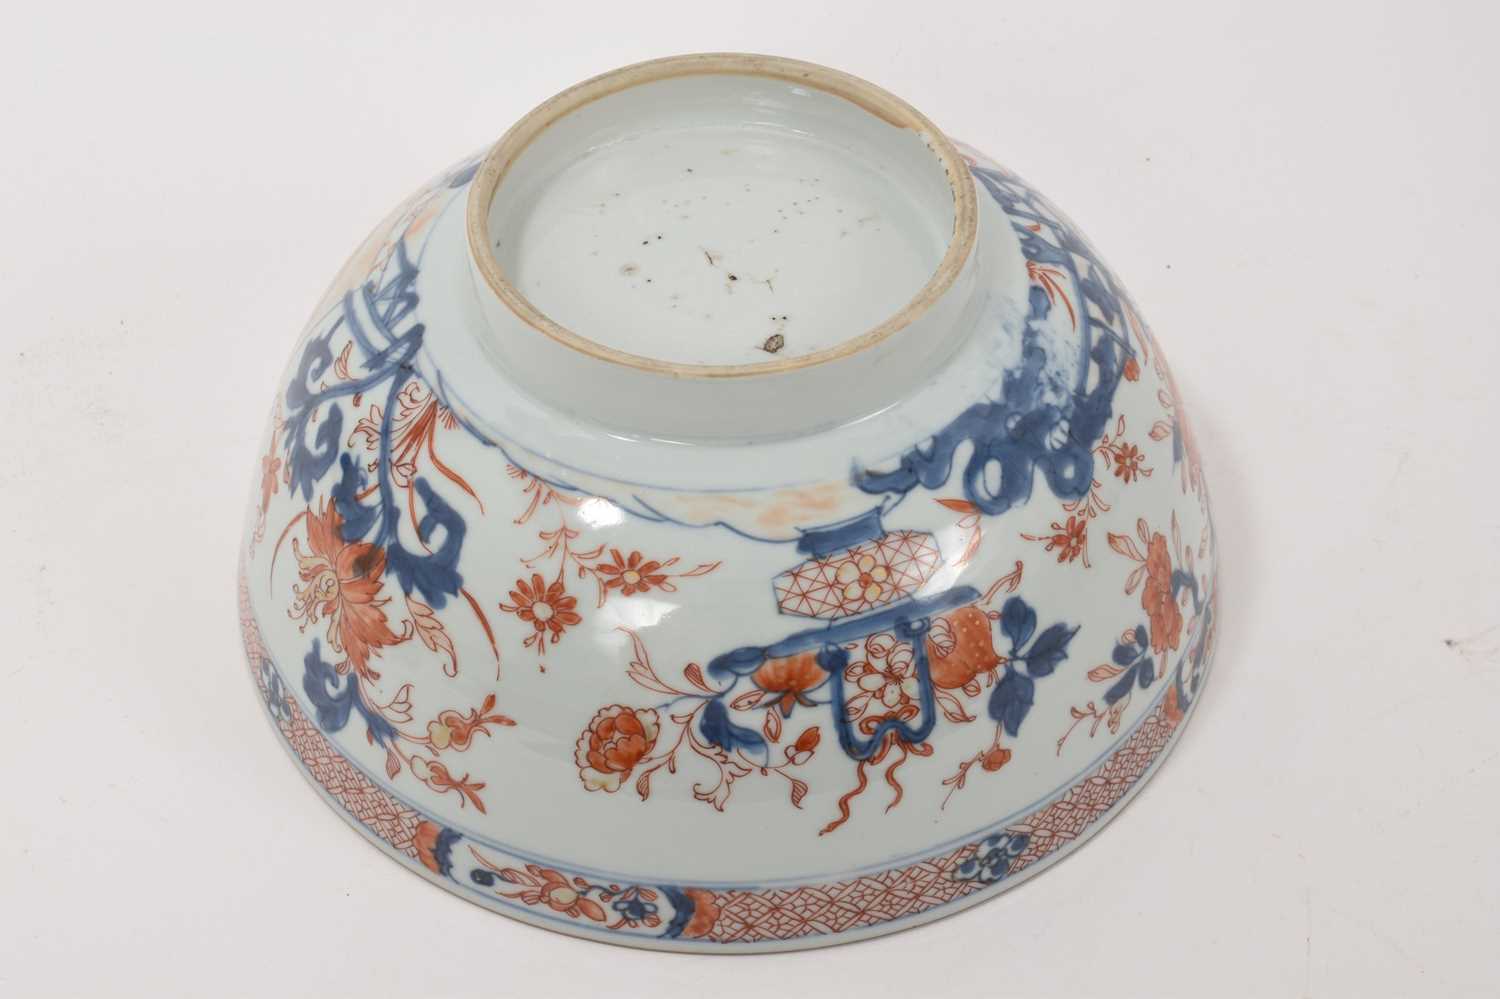 Unusual antique Chinese Imari porcelain bowl with panel of censer and ruyi scepter - Image 5 of 5